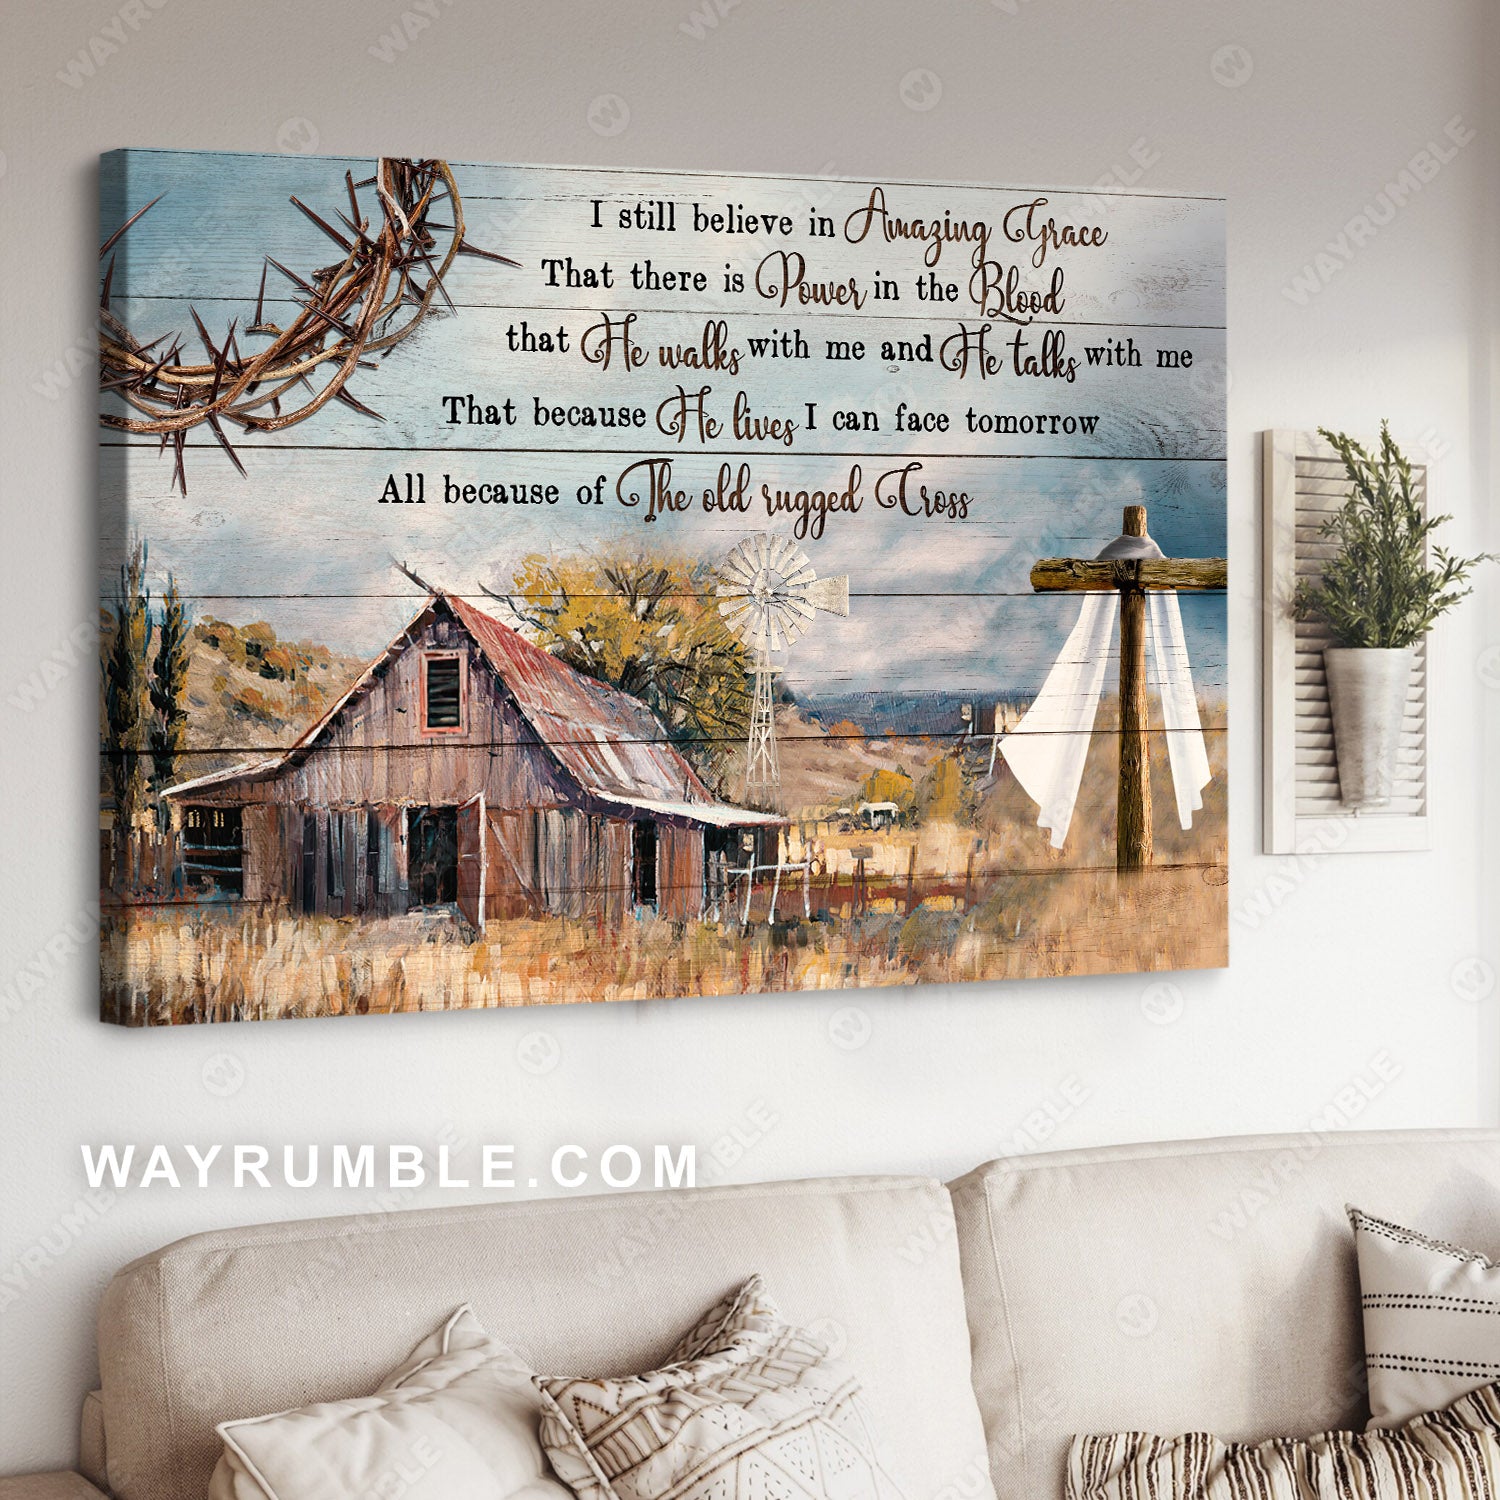 Old barn house, Wooden cross, The crown of thorns, I still believe in amazing grace - Jesus Landscape Canvas Prints, Christian Wall Art